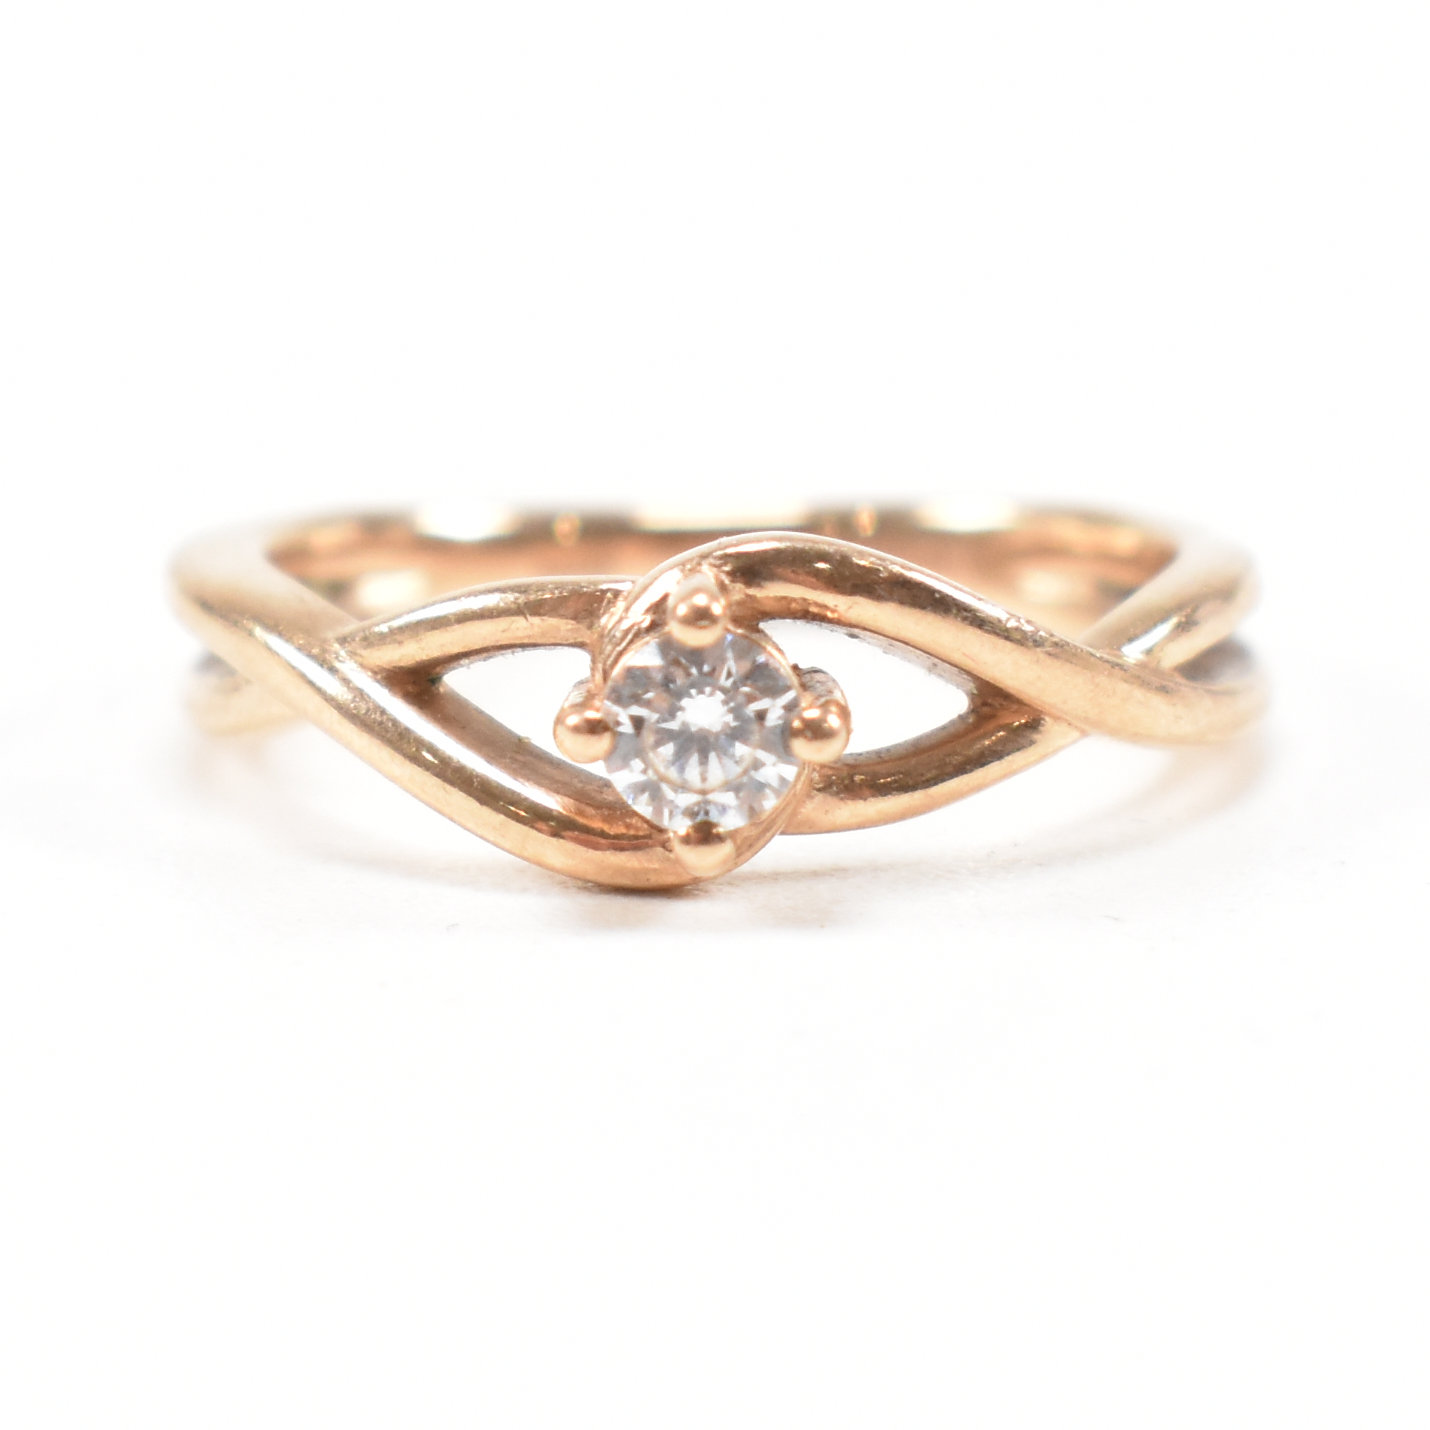 HALLMARKED 9CT ROSE GOLD & WHITE STONE SOLITAIRE CROSSOVER RING